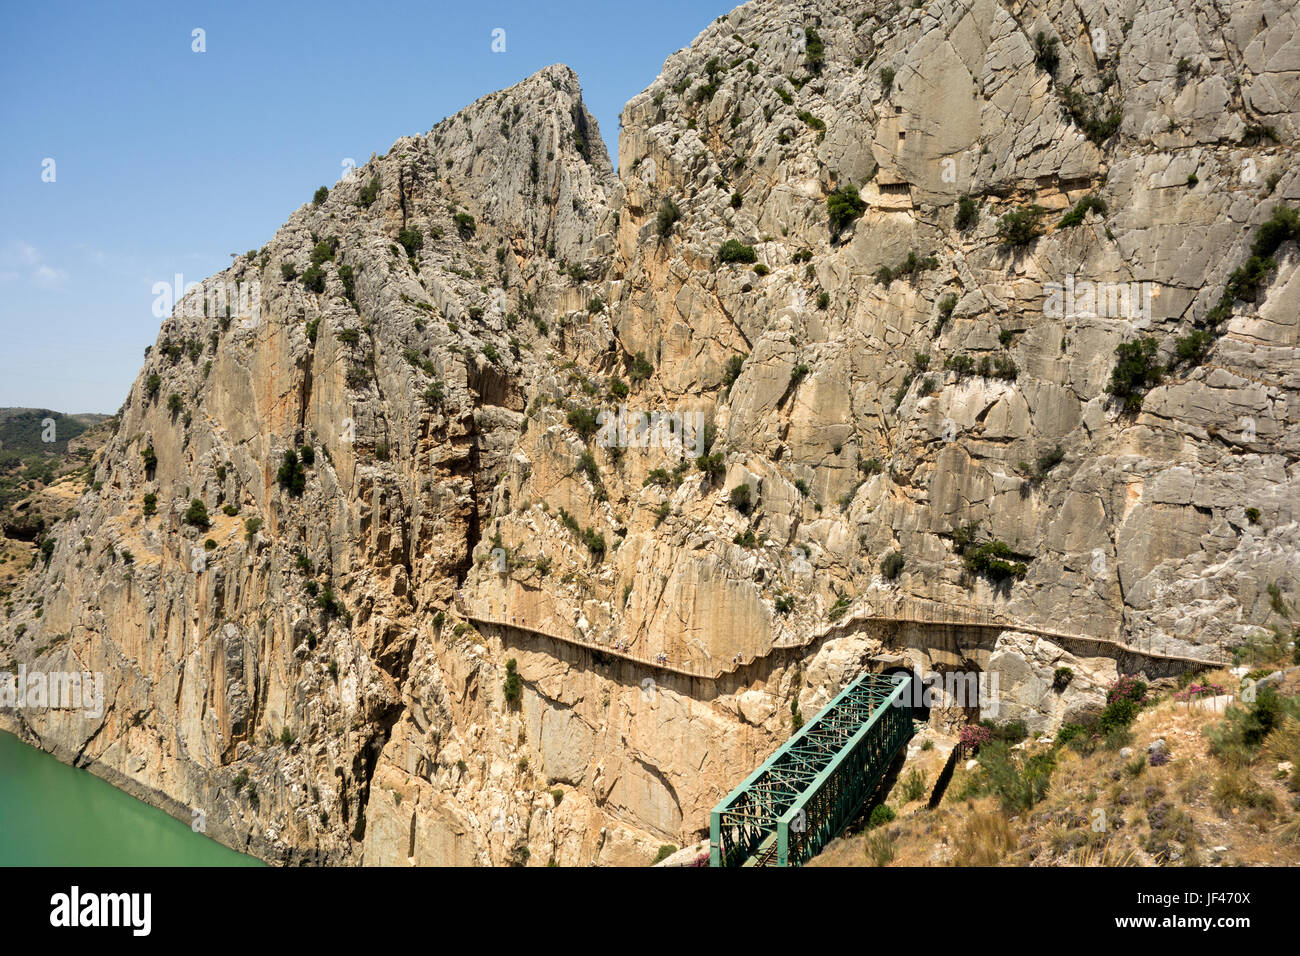 The Spanish Caminito del Rey tourist attraction, Malaga Province with high walkway around a gorge with the Rio Guadalhorce running through it. Stock Photo